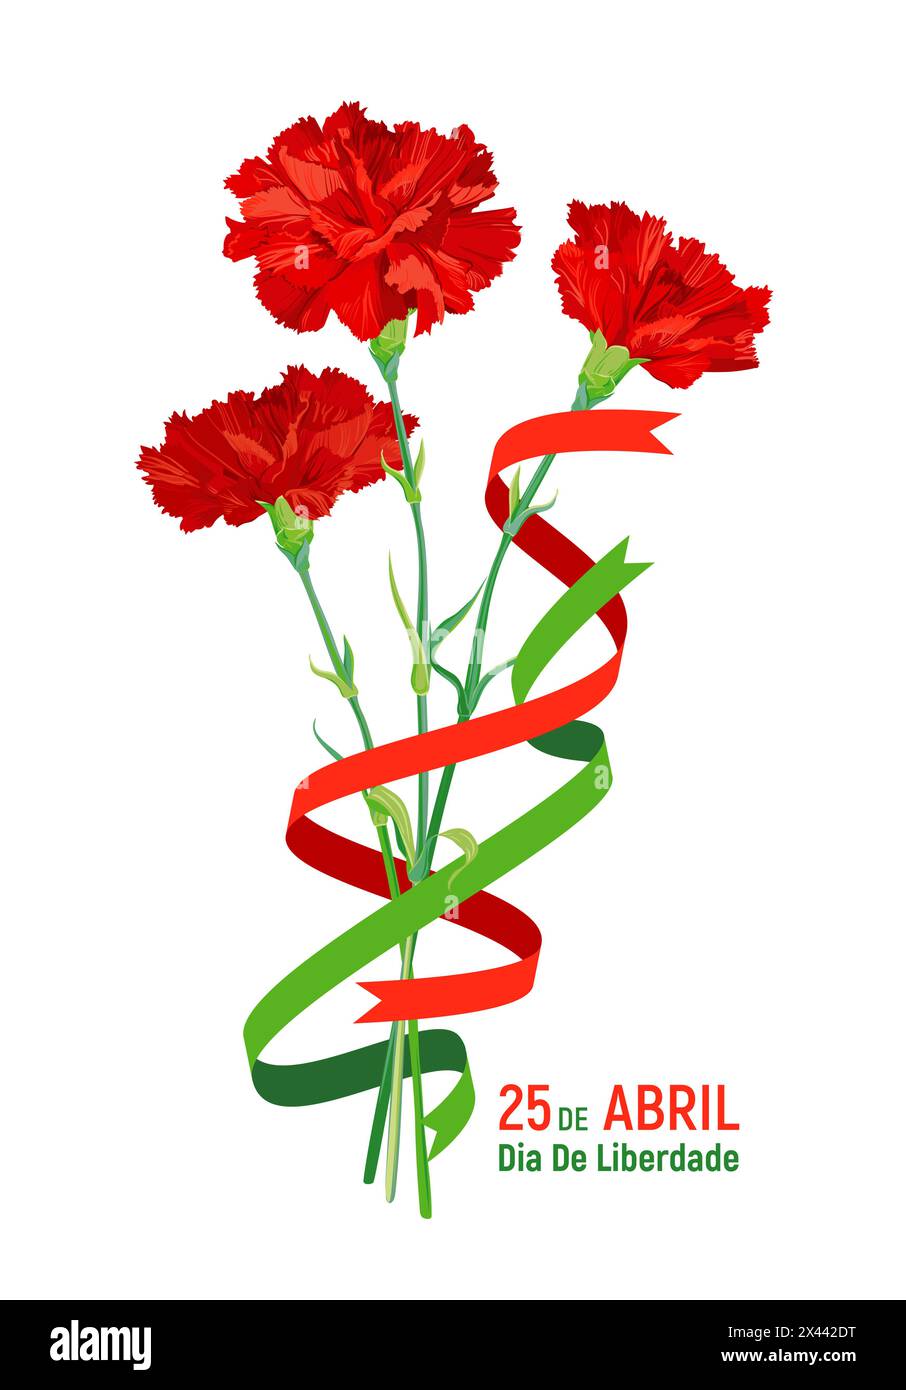 A festive composition for the Freedom Day of Portugal. A bouquet of red carnations and red and green ribbons. A symbol of Victory and Revolution. Tran Stock Vector